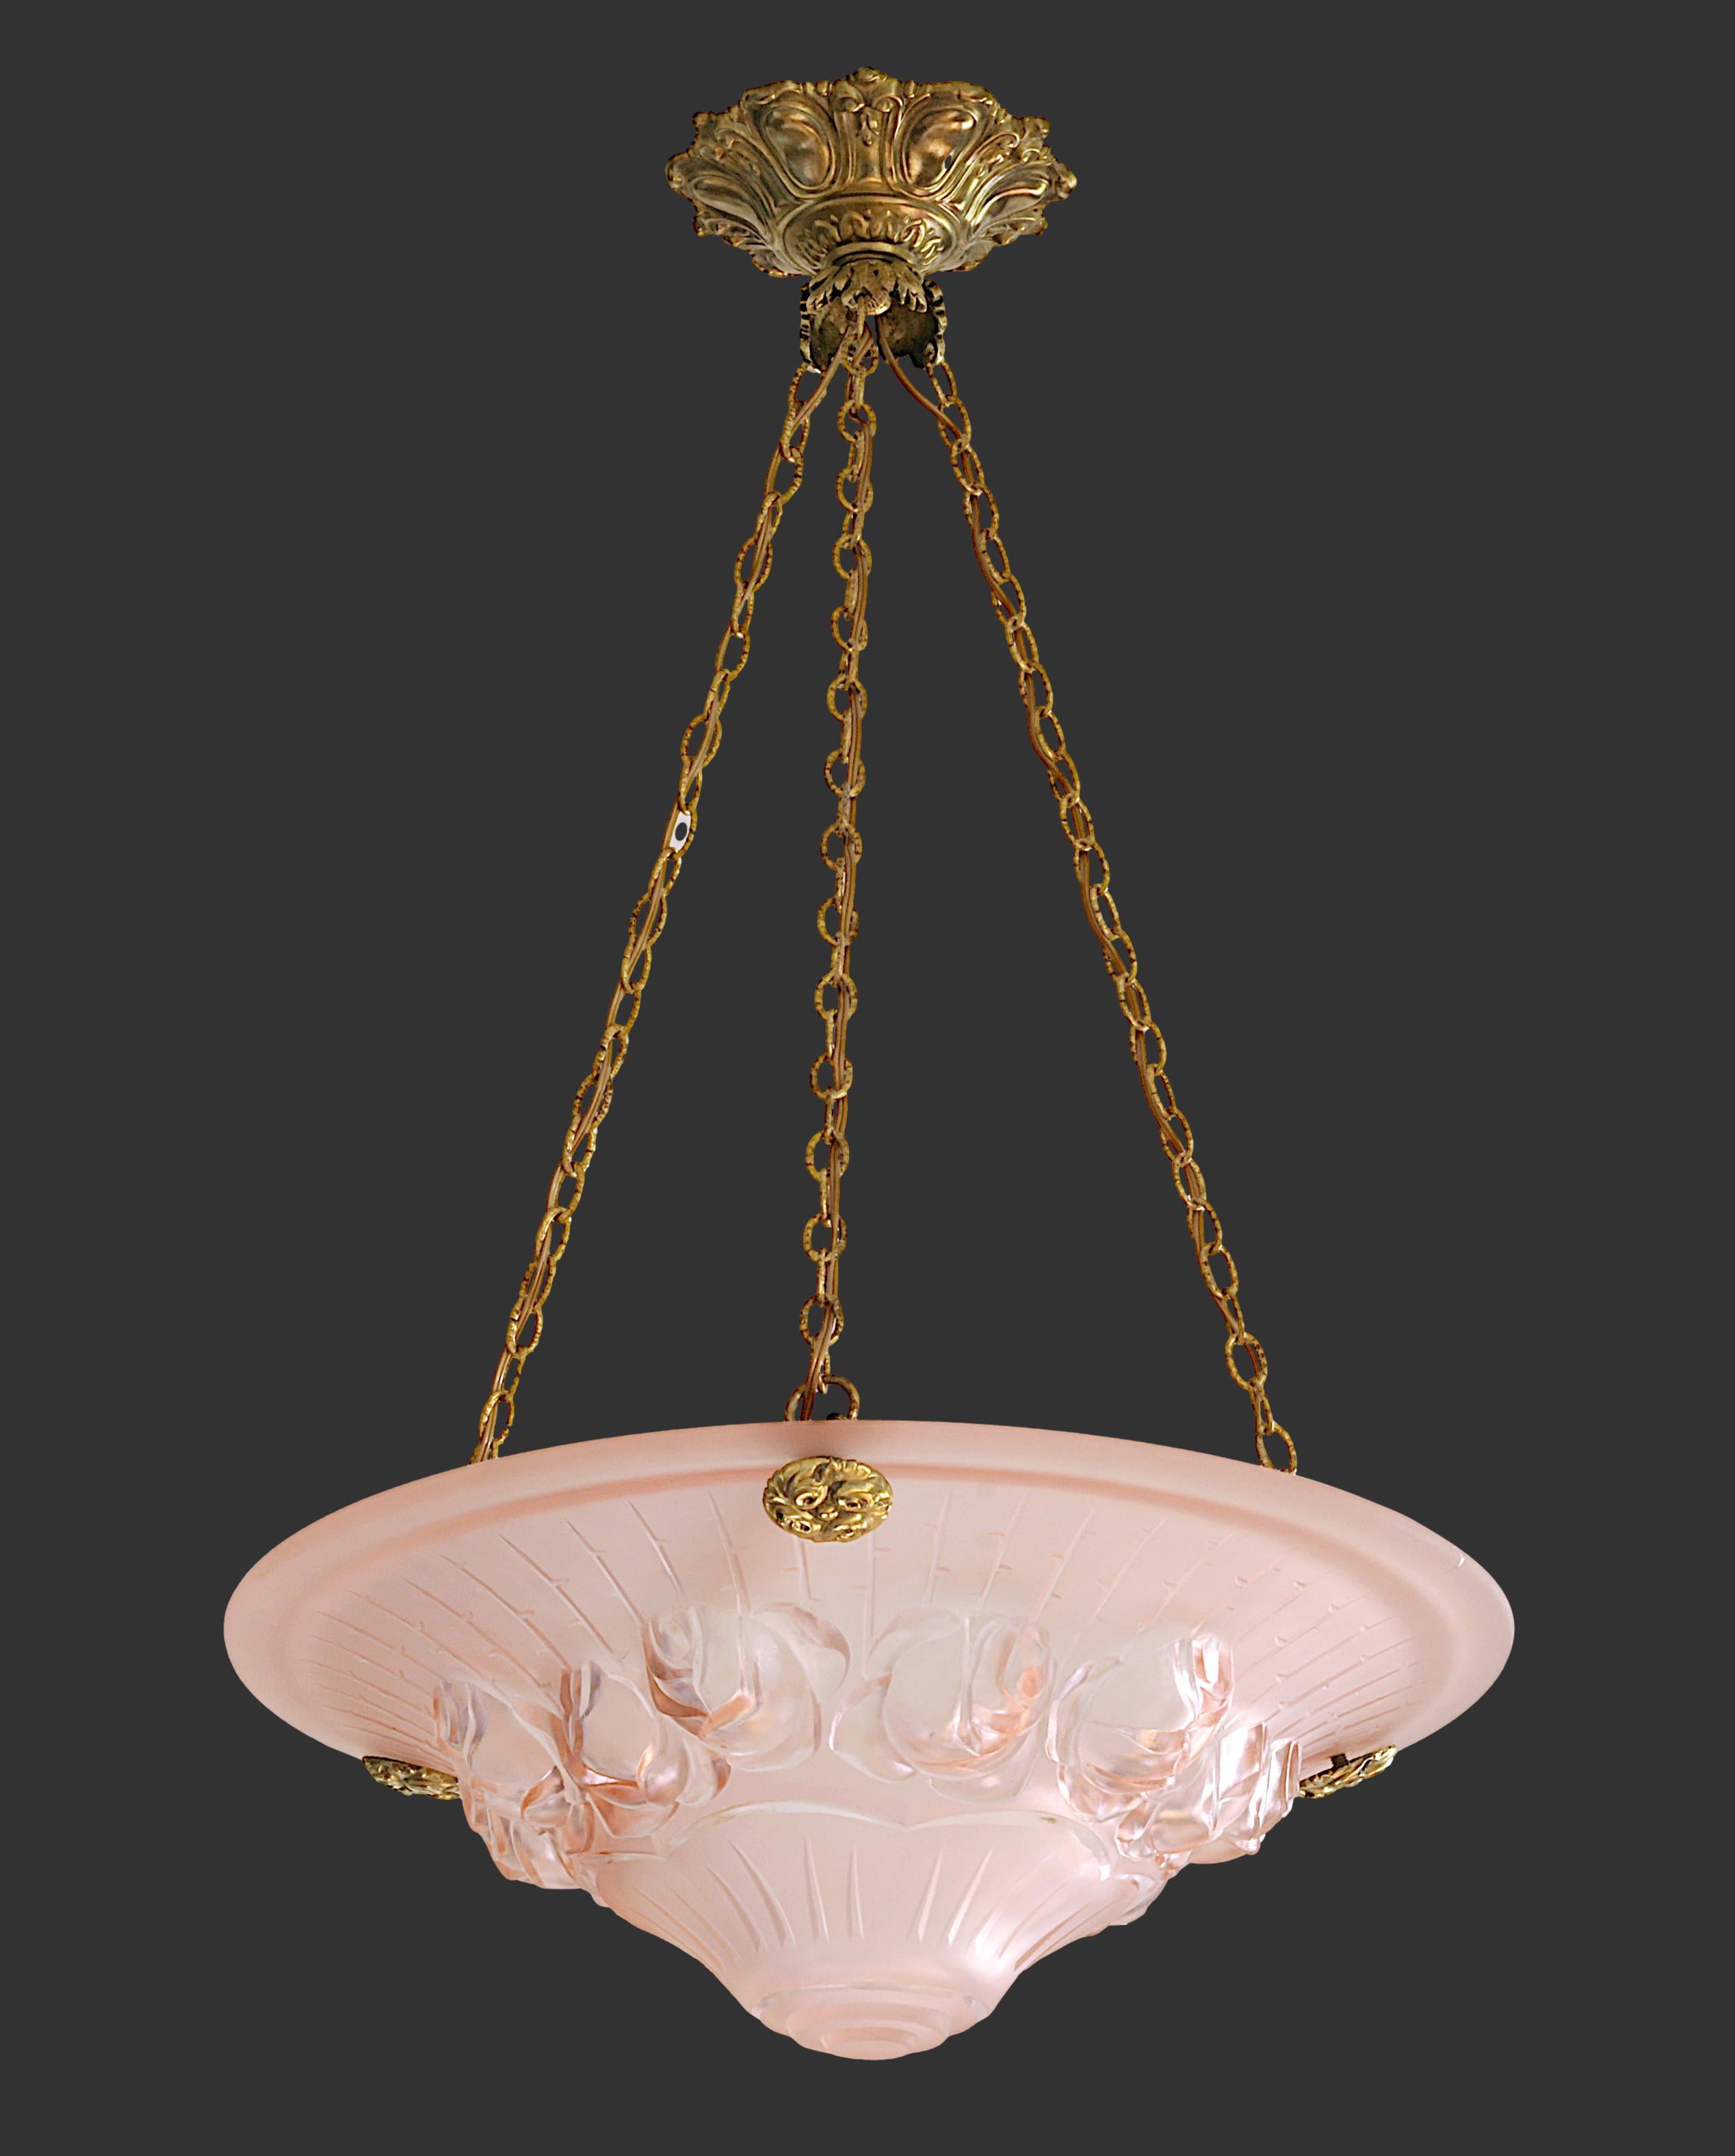 French Art Deco pendant chandelier by Charles Schneider, Epinay-sur-Seine (Paris), 1920s. Pink frosted molded glass and stamped brass. Height : 21.7